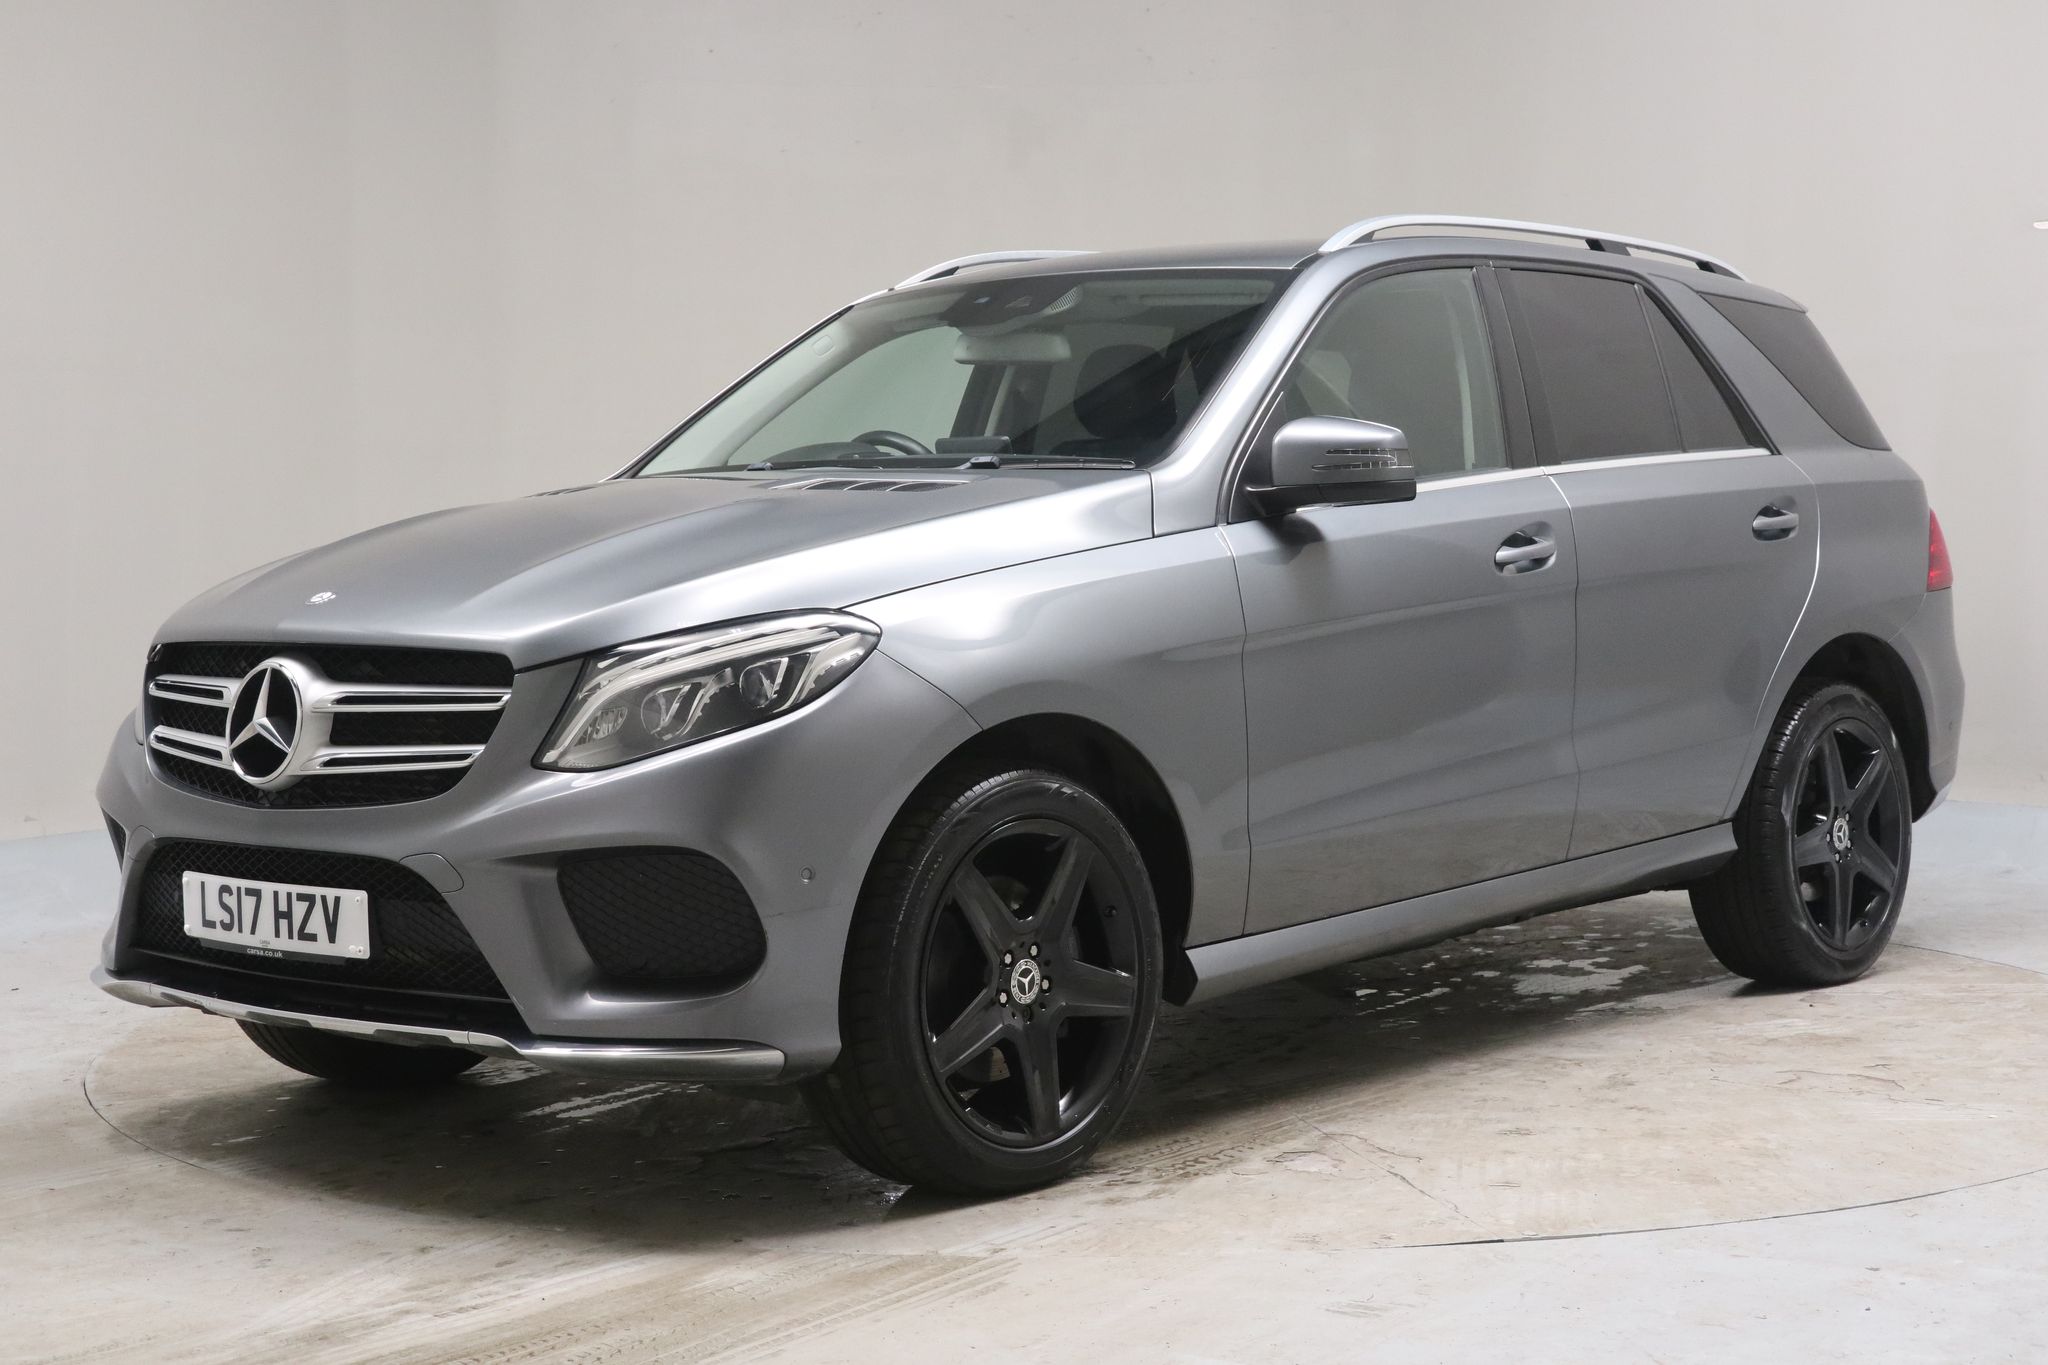 2017 used Mercedes-Benz Gle Class 2.1 GLE250d AMG Line G-Tronic 4MATIC (204 ps)